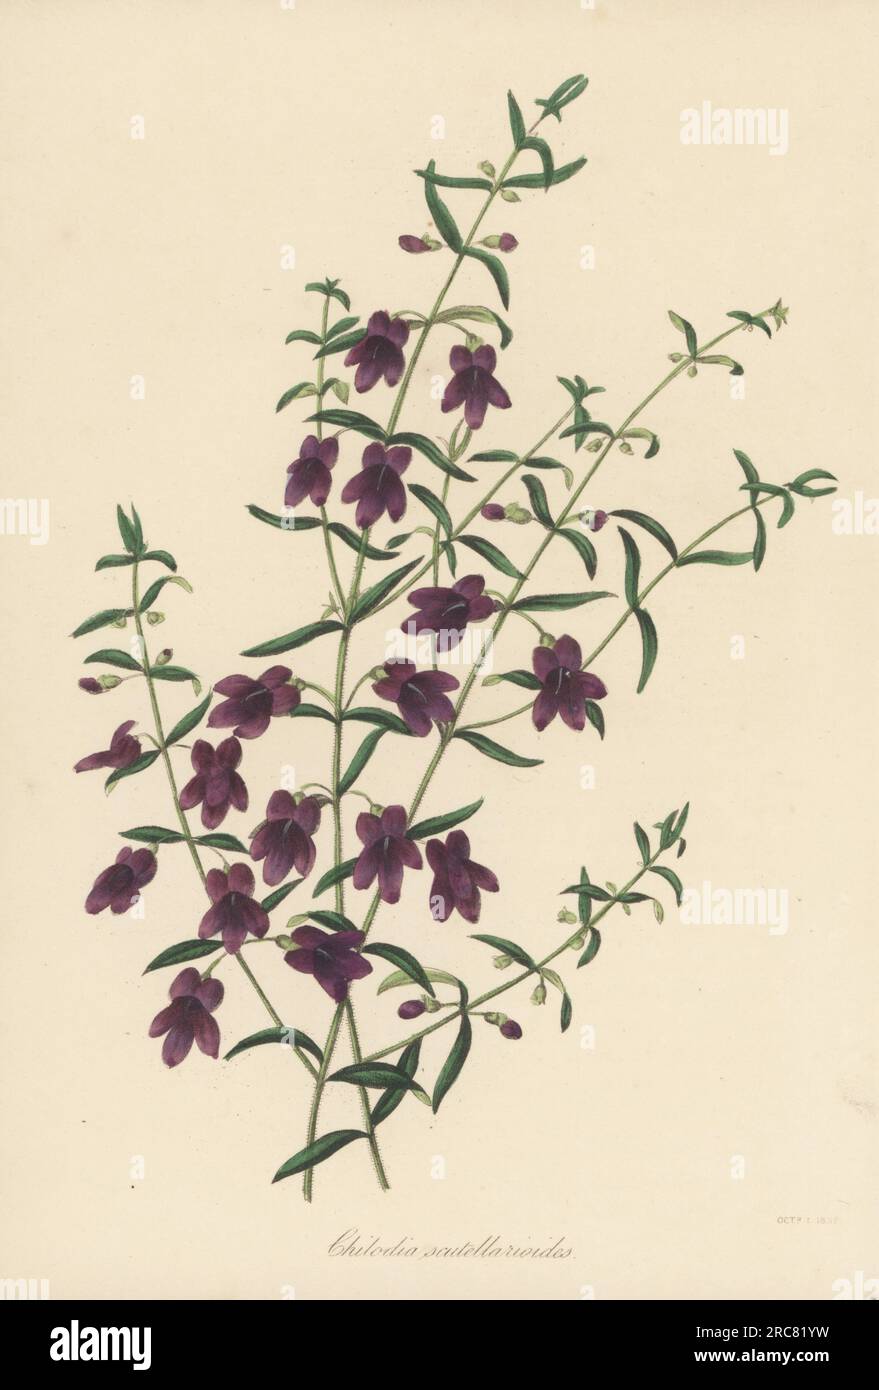 Mint bush, Prostanthera scutellarioides. Native to New South Wales, Australia, first described in 1810 by Scottish botanist Robert Brown. Scutellaria-like chilodia, Chilodia scutellarioides. Handcoloured lithograph from Joseph Paxton’s Magazine of Botany, and Register of Flowering Plants, Volume 5, Orr and Smith, London, 1838. Stock Photo